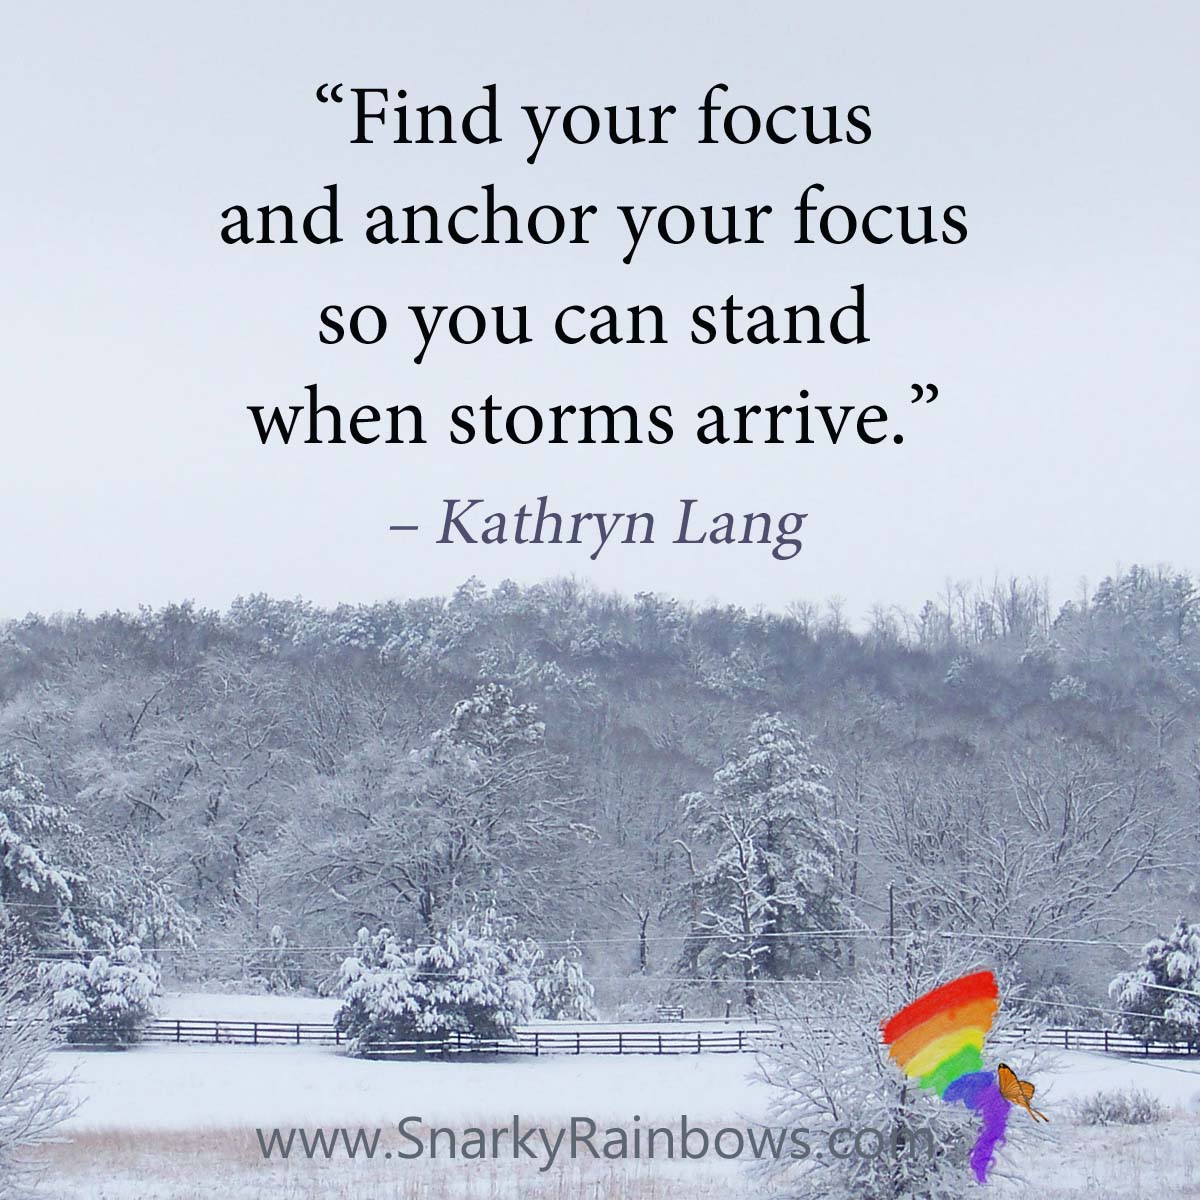 #Quoteoftheday - find your focus